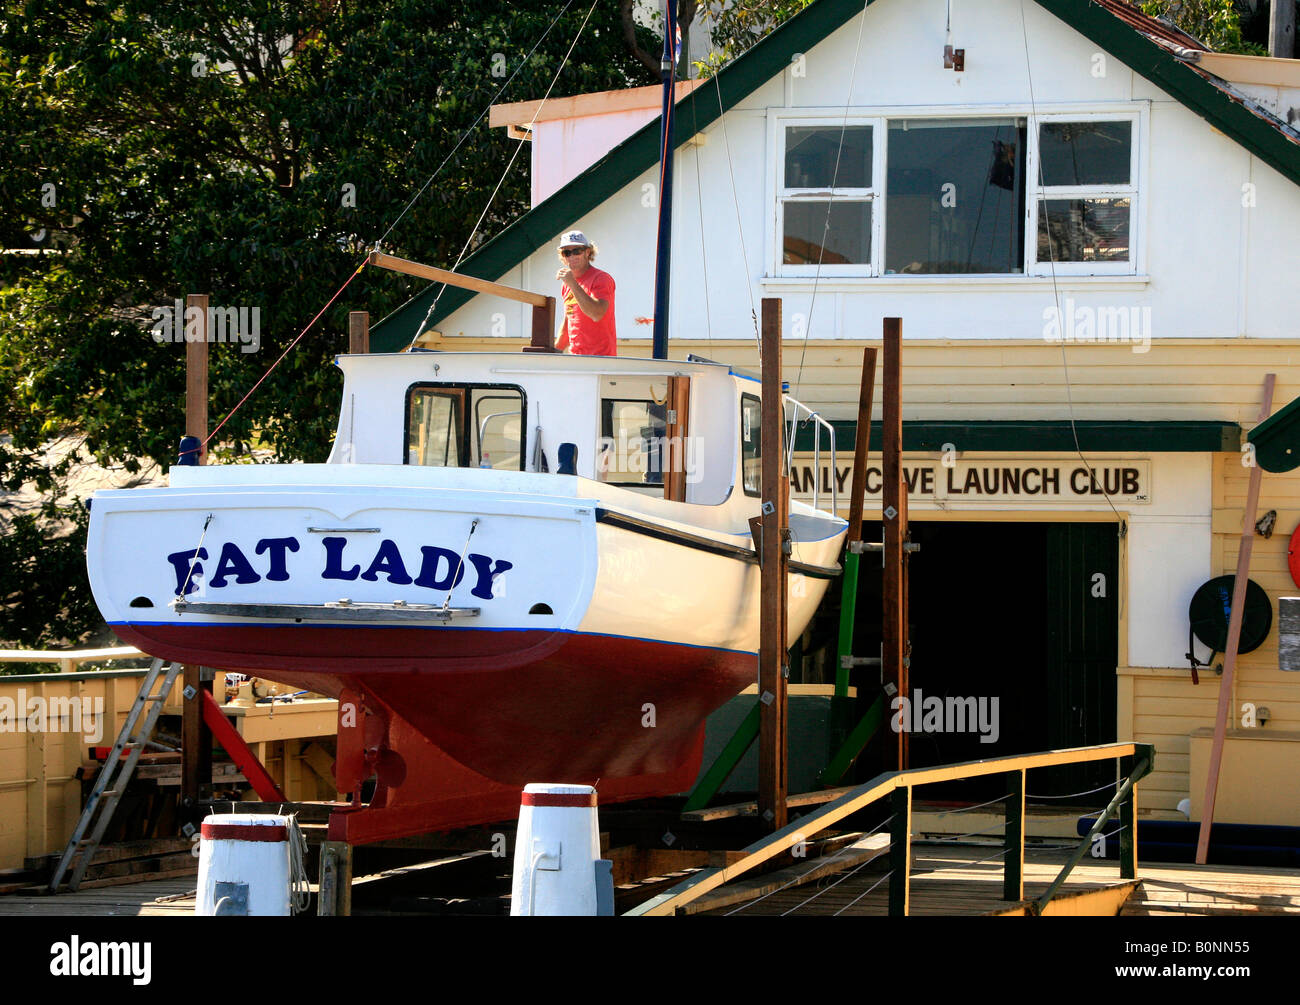 Working on Fat Lady Manly Cove Launch Club Sydney Australia Stock Photo